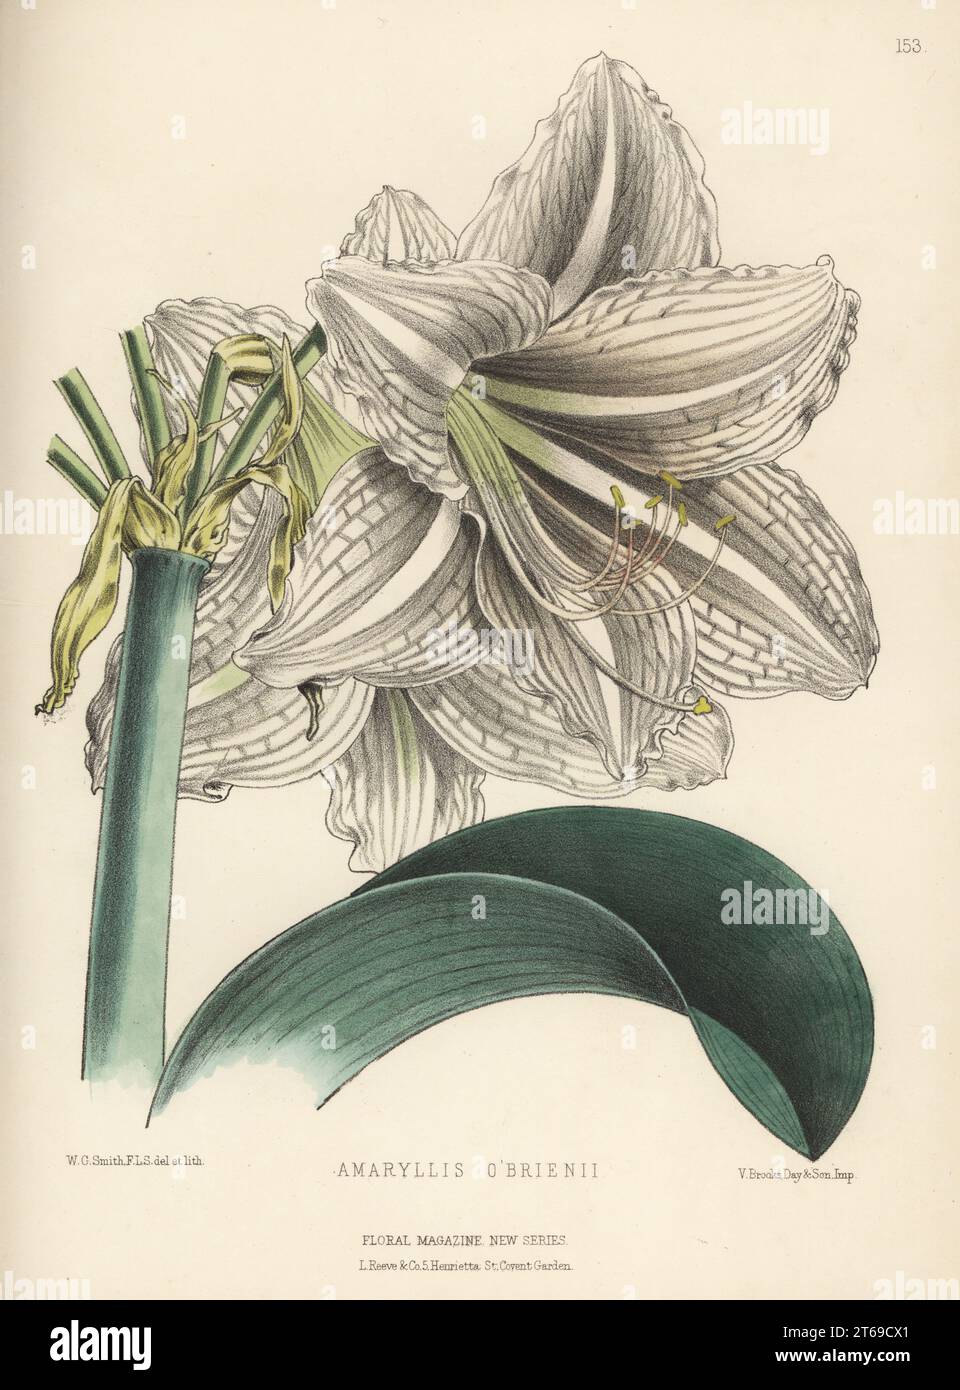 Amaryllis o'brienii. New hybrid of Hippeastrum pardinum and Amaryllis reticulata-striatifolia (Hippeastrum reticulatum) raised by Edward George Henderson and Sons nursery of St. John's Wood. Handcolored botanical illustration drawn and lithographed by Worthington George Smith from Henry Honywood Dombrain's Floral Magazine, New Series, Volume 4, L. Reeve, London, 1875. Lithograph printed by Vincent Brooks, Day & Son. Stock Photo